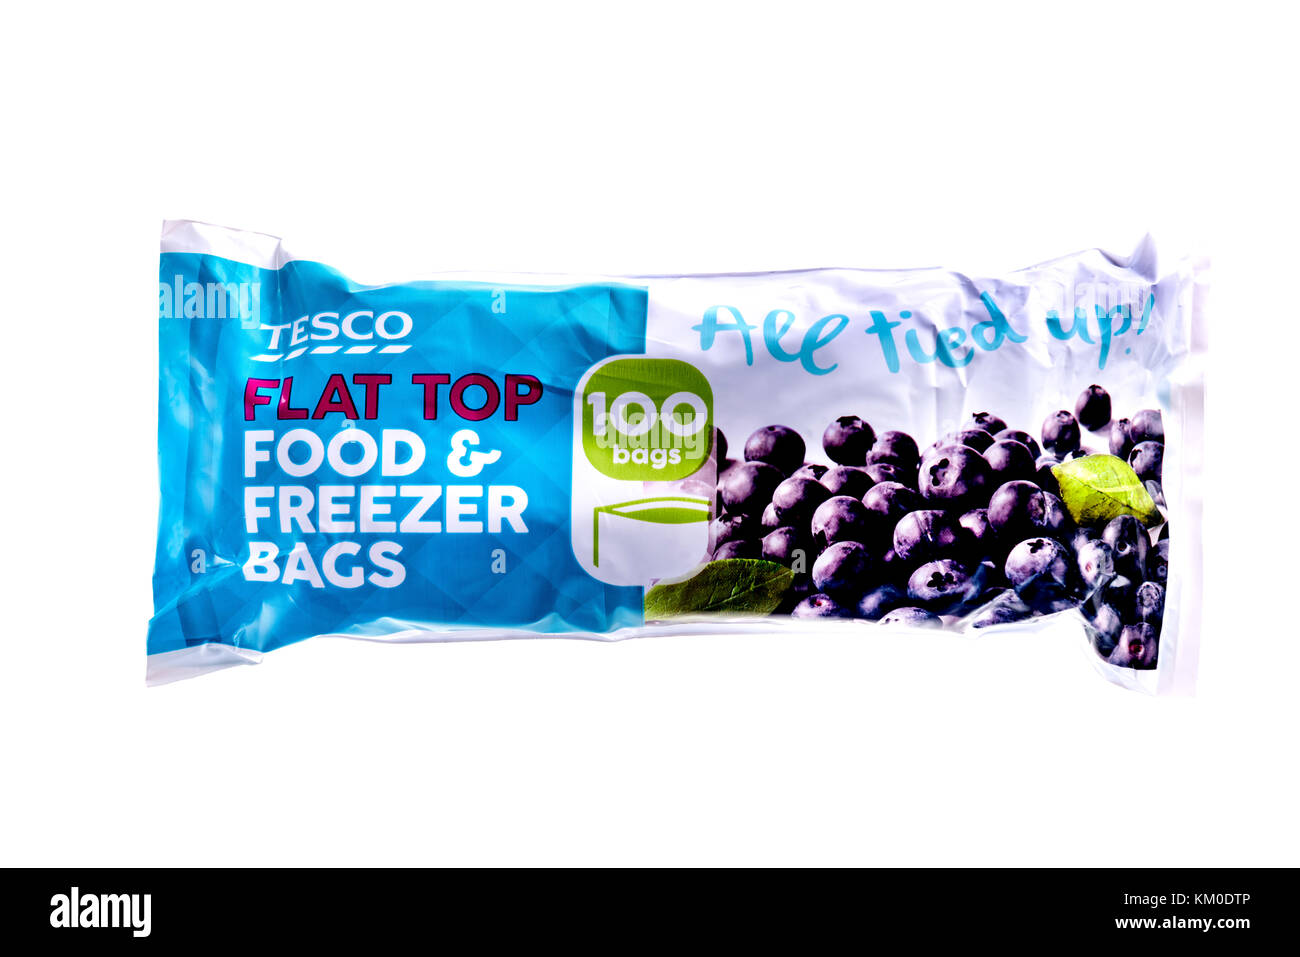 Tesco, flat top food and freezer bags, packaging. Stock Photo